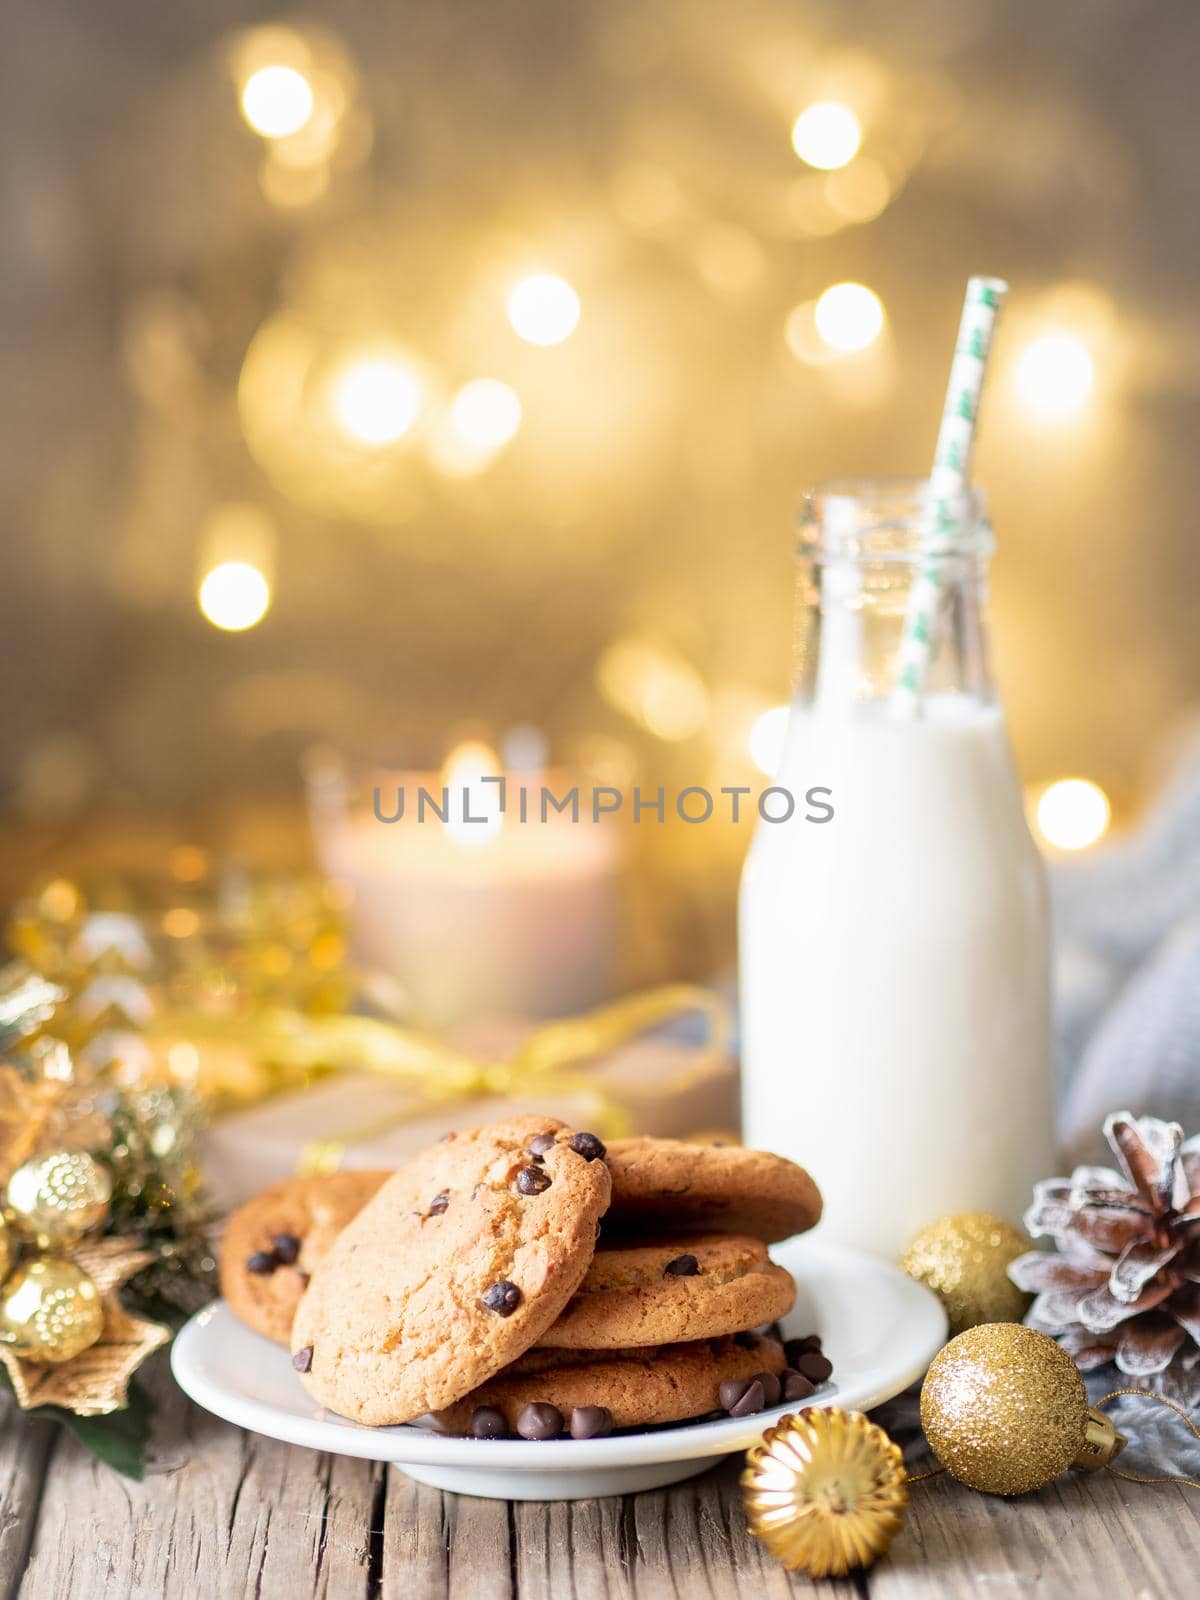 Christmas background with Chocolate chip cookies, bottle with milk. Cozy evening, mug of drink, Christmas decorations, candles and lights garlands.